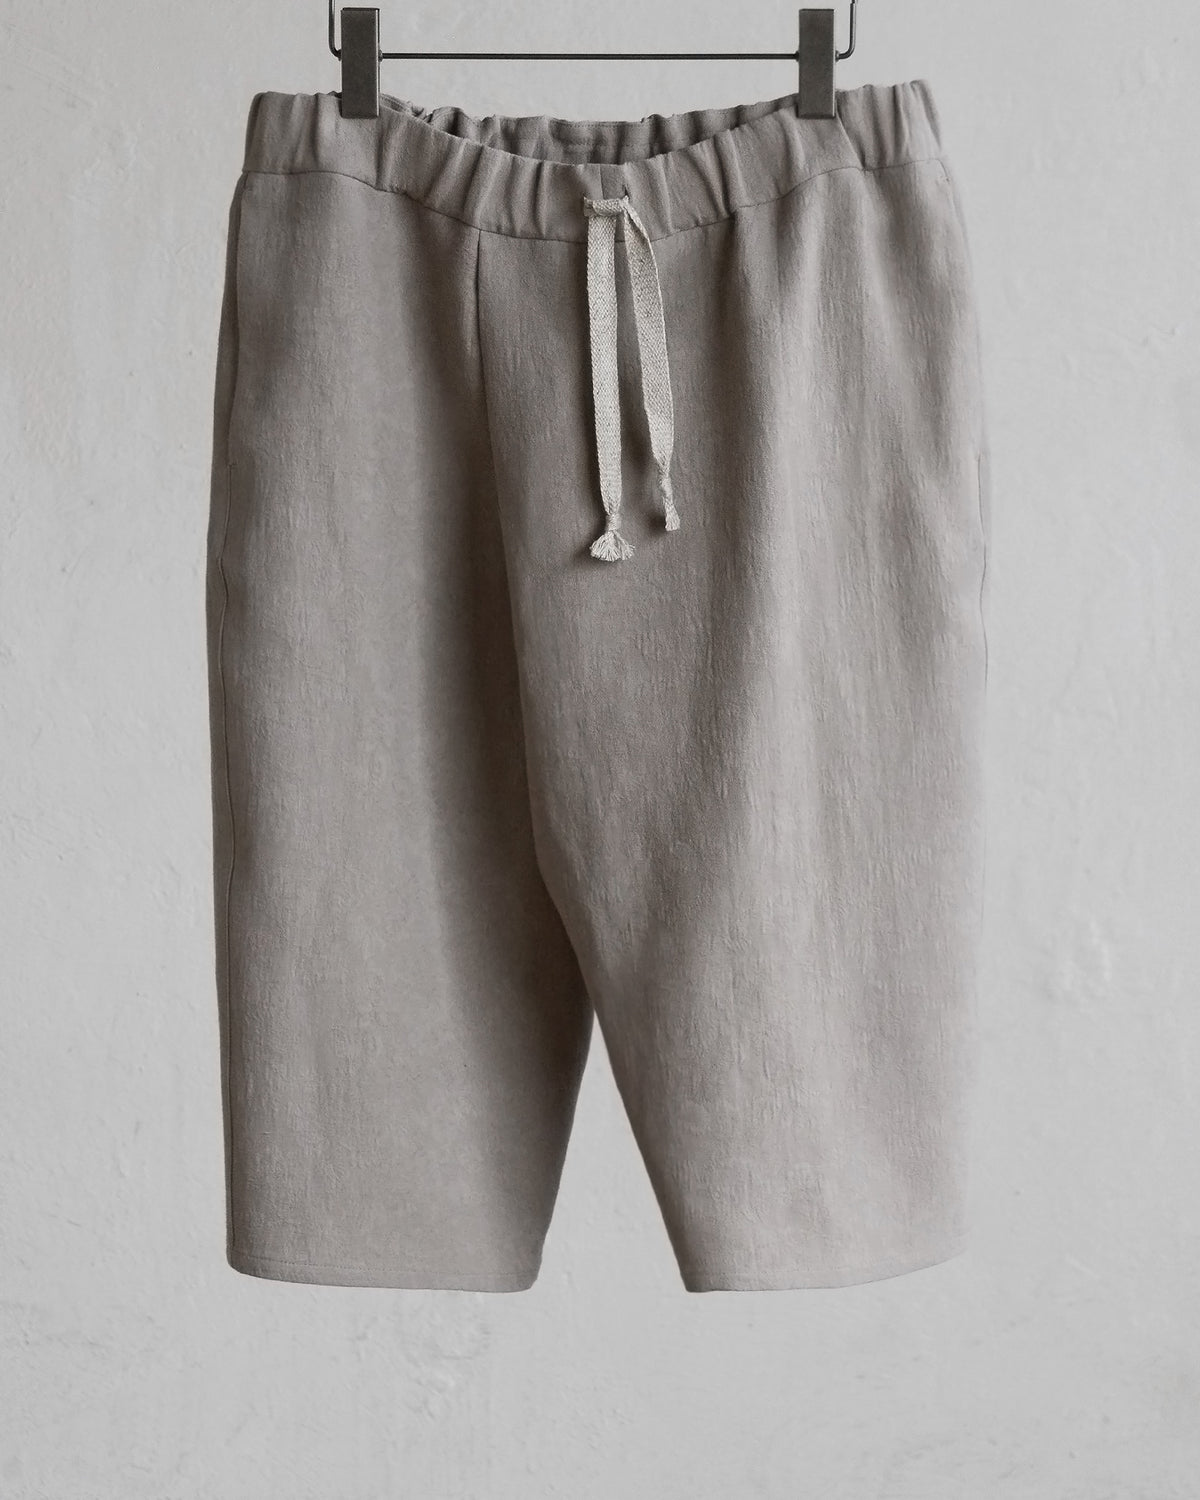 OURO SHORT • Driftwood